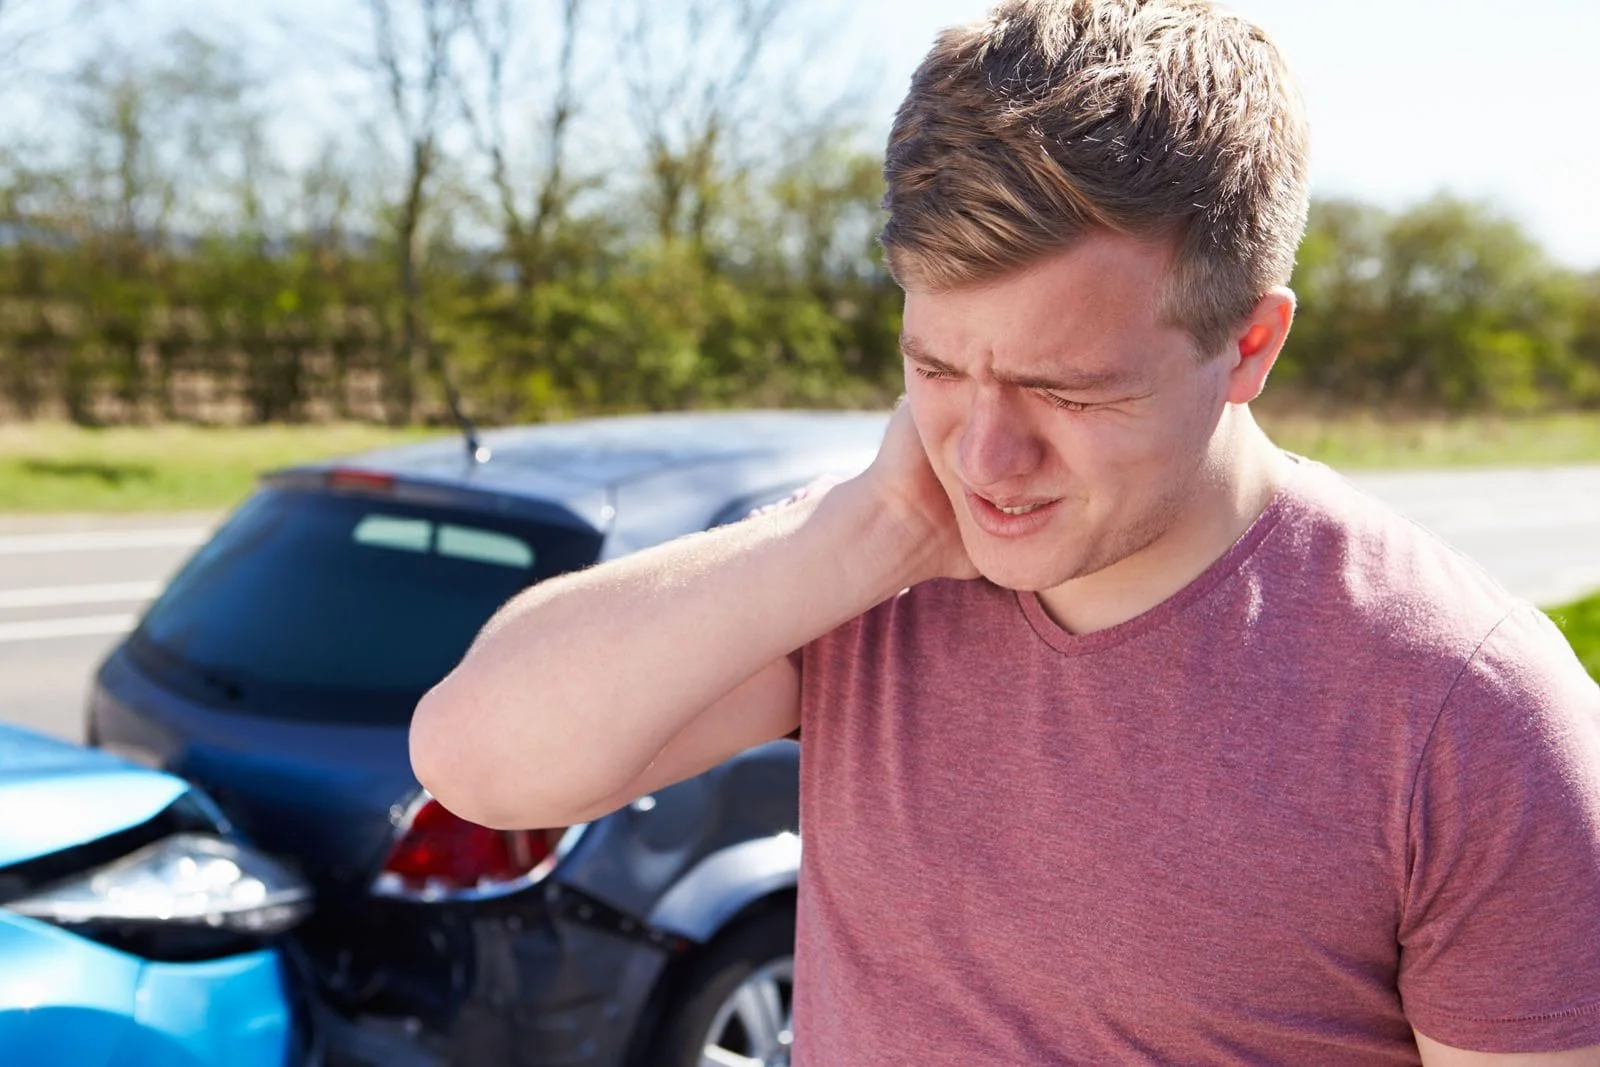 man holding his neck from whiplash pain from an auto accident injury; car accident in the background